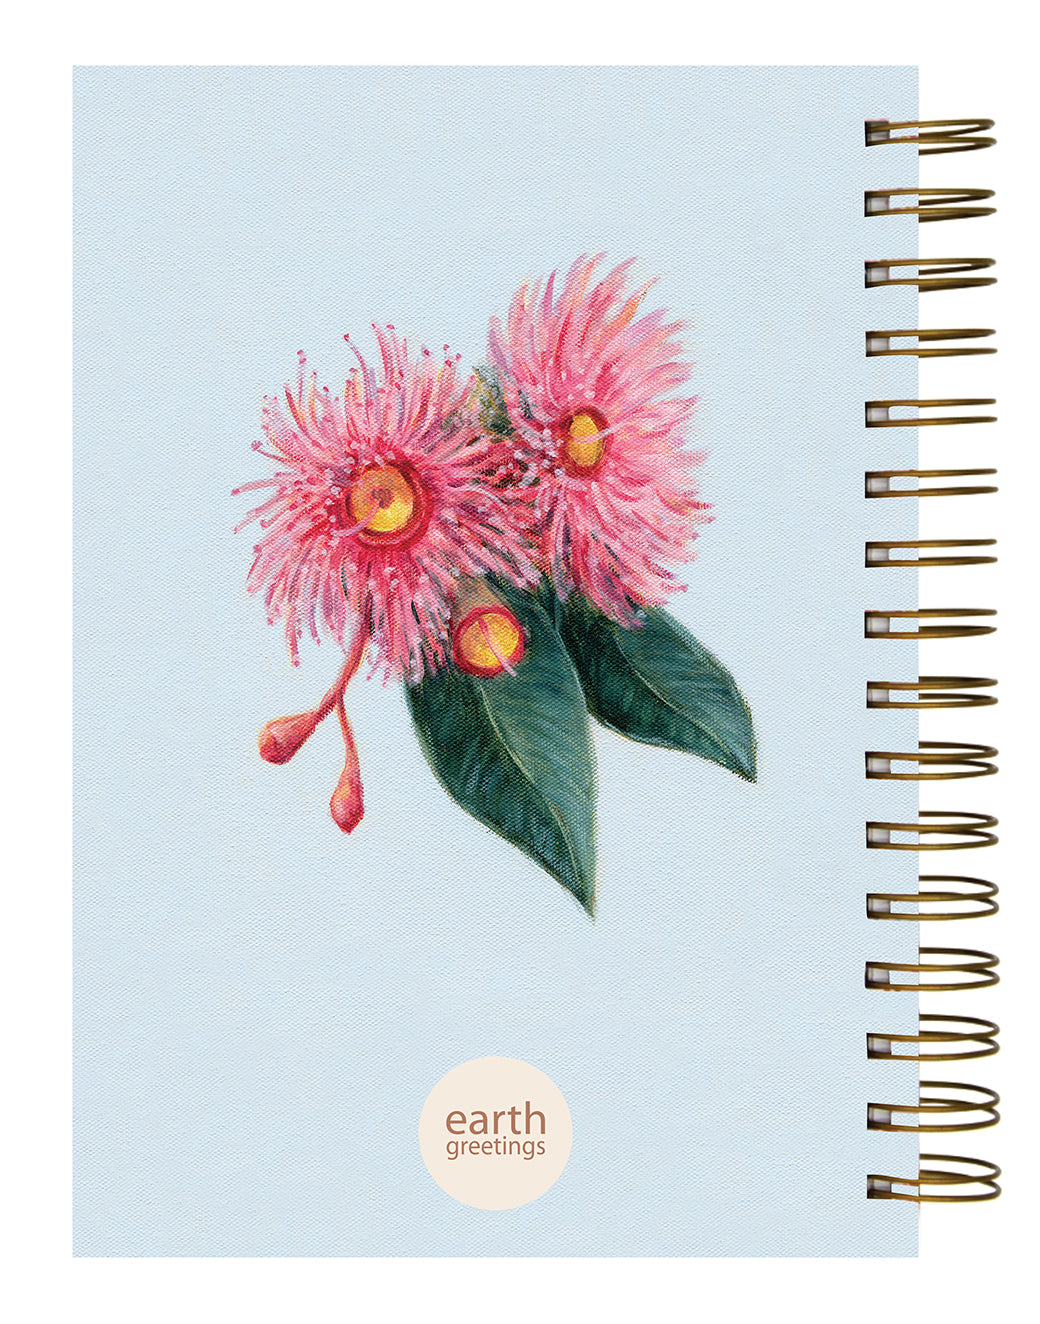 Earth Greetings Your Journal, 200 Lined Pages, Summer Gumflowers Design From The Vickie Liu Collection